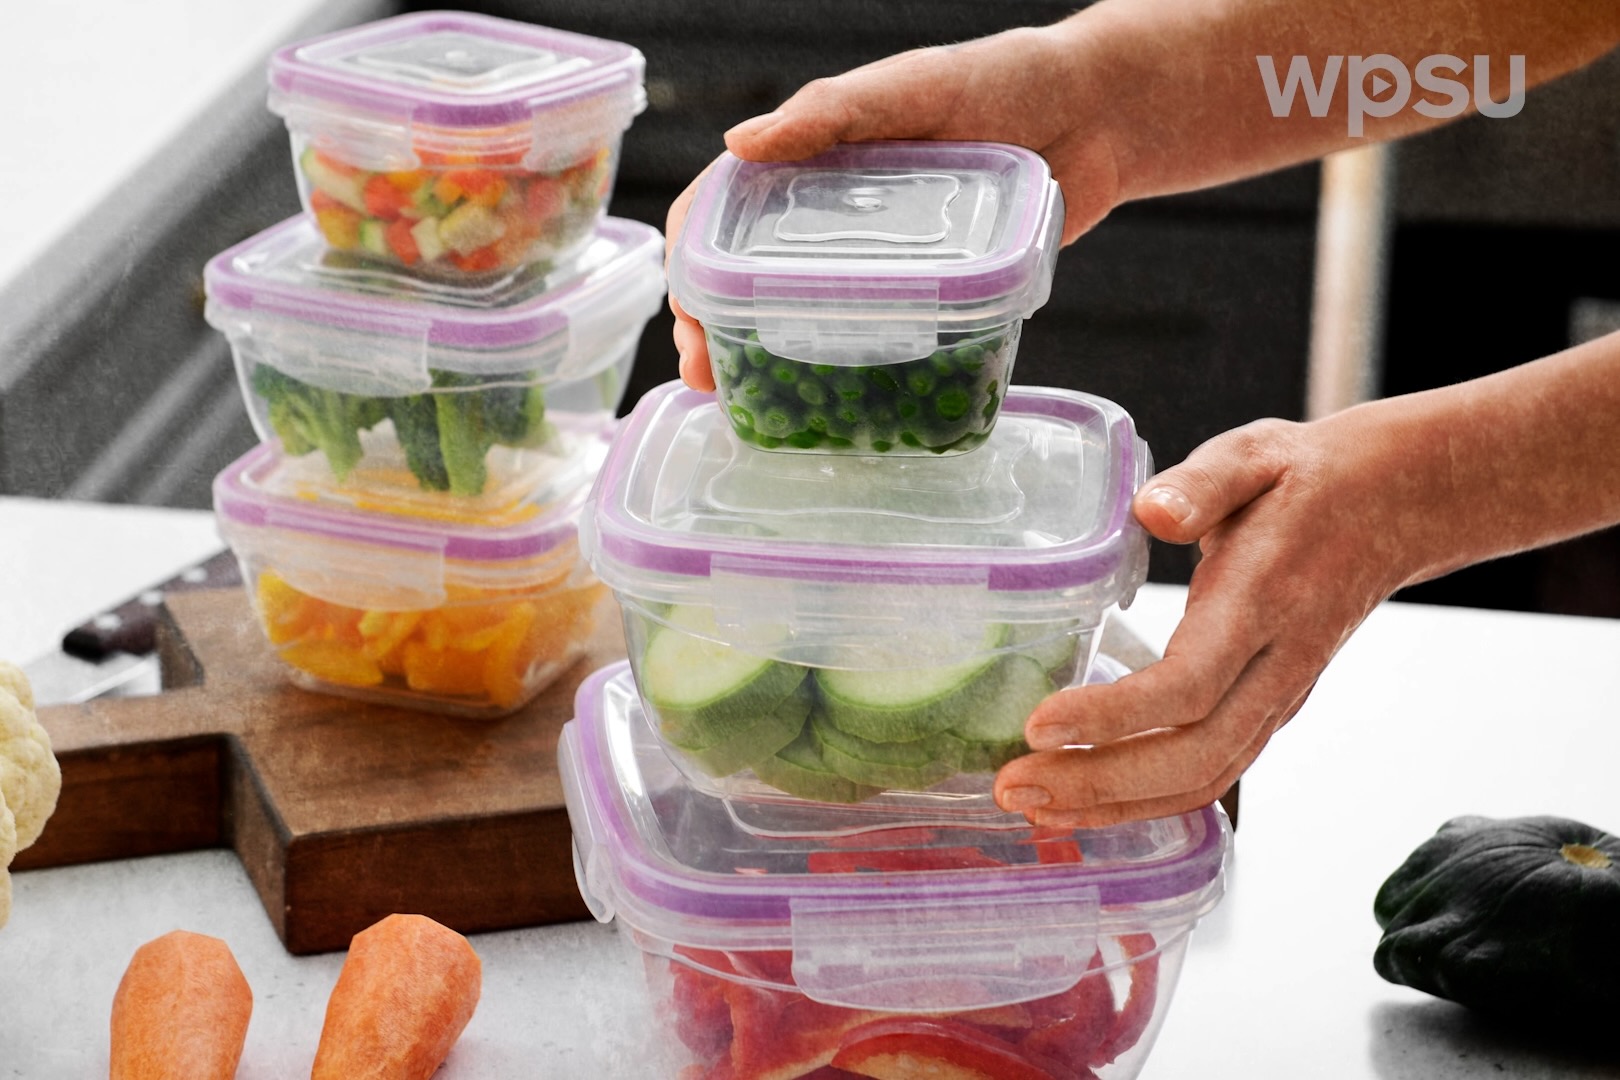 Vegetables sealed in storage containers before being placed in a freezer.